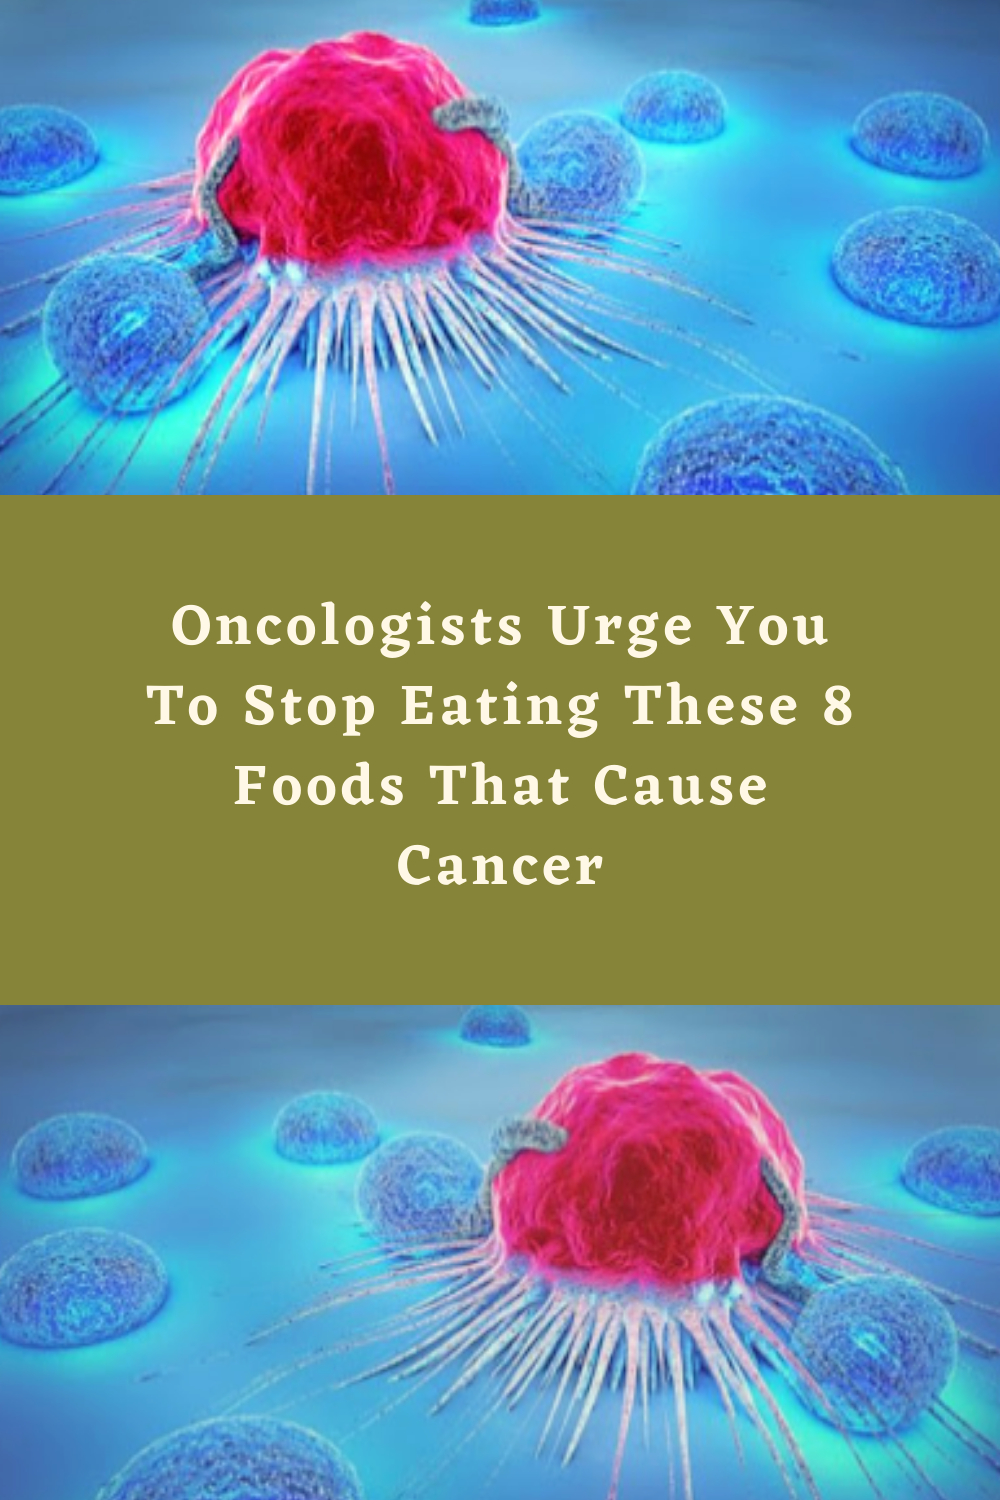 Oncologists Urge You To Stop Eating These 8 Foods That Cause Cancer